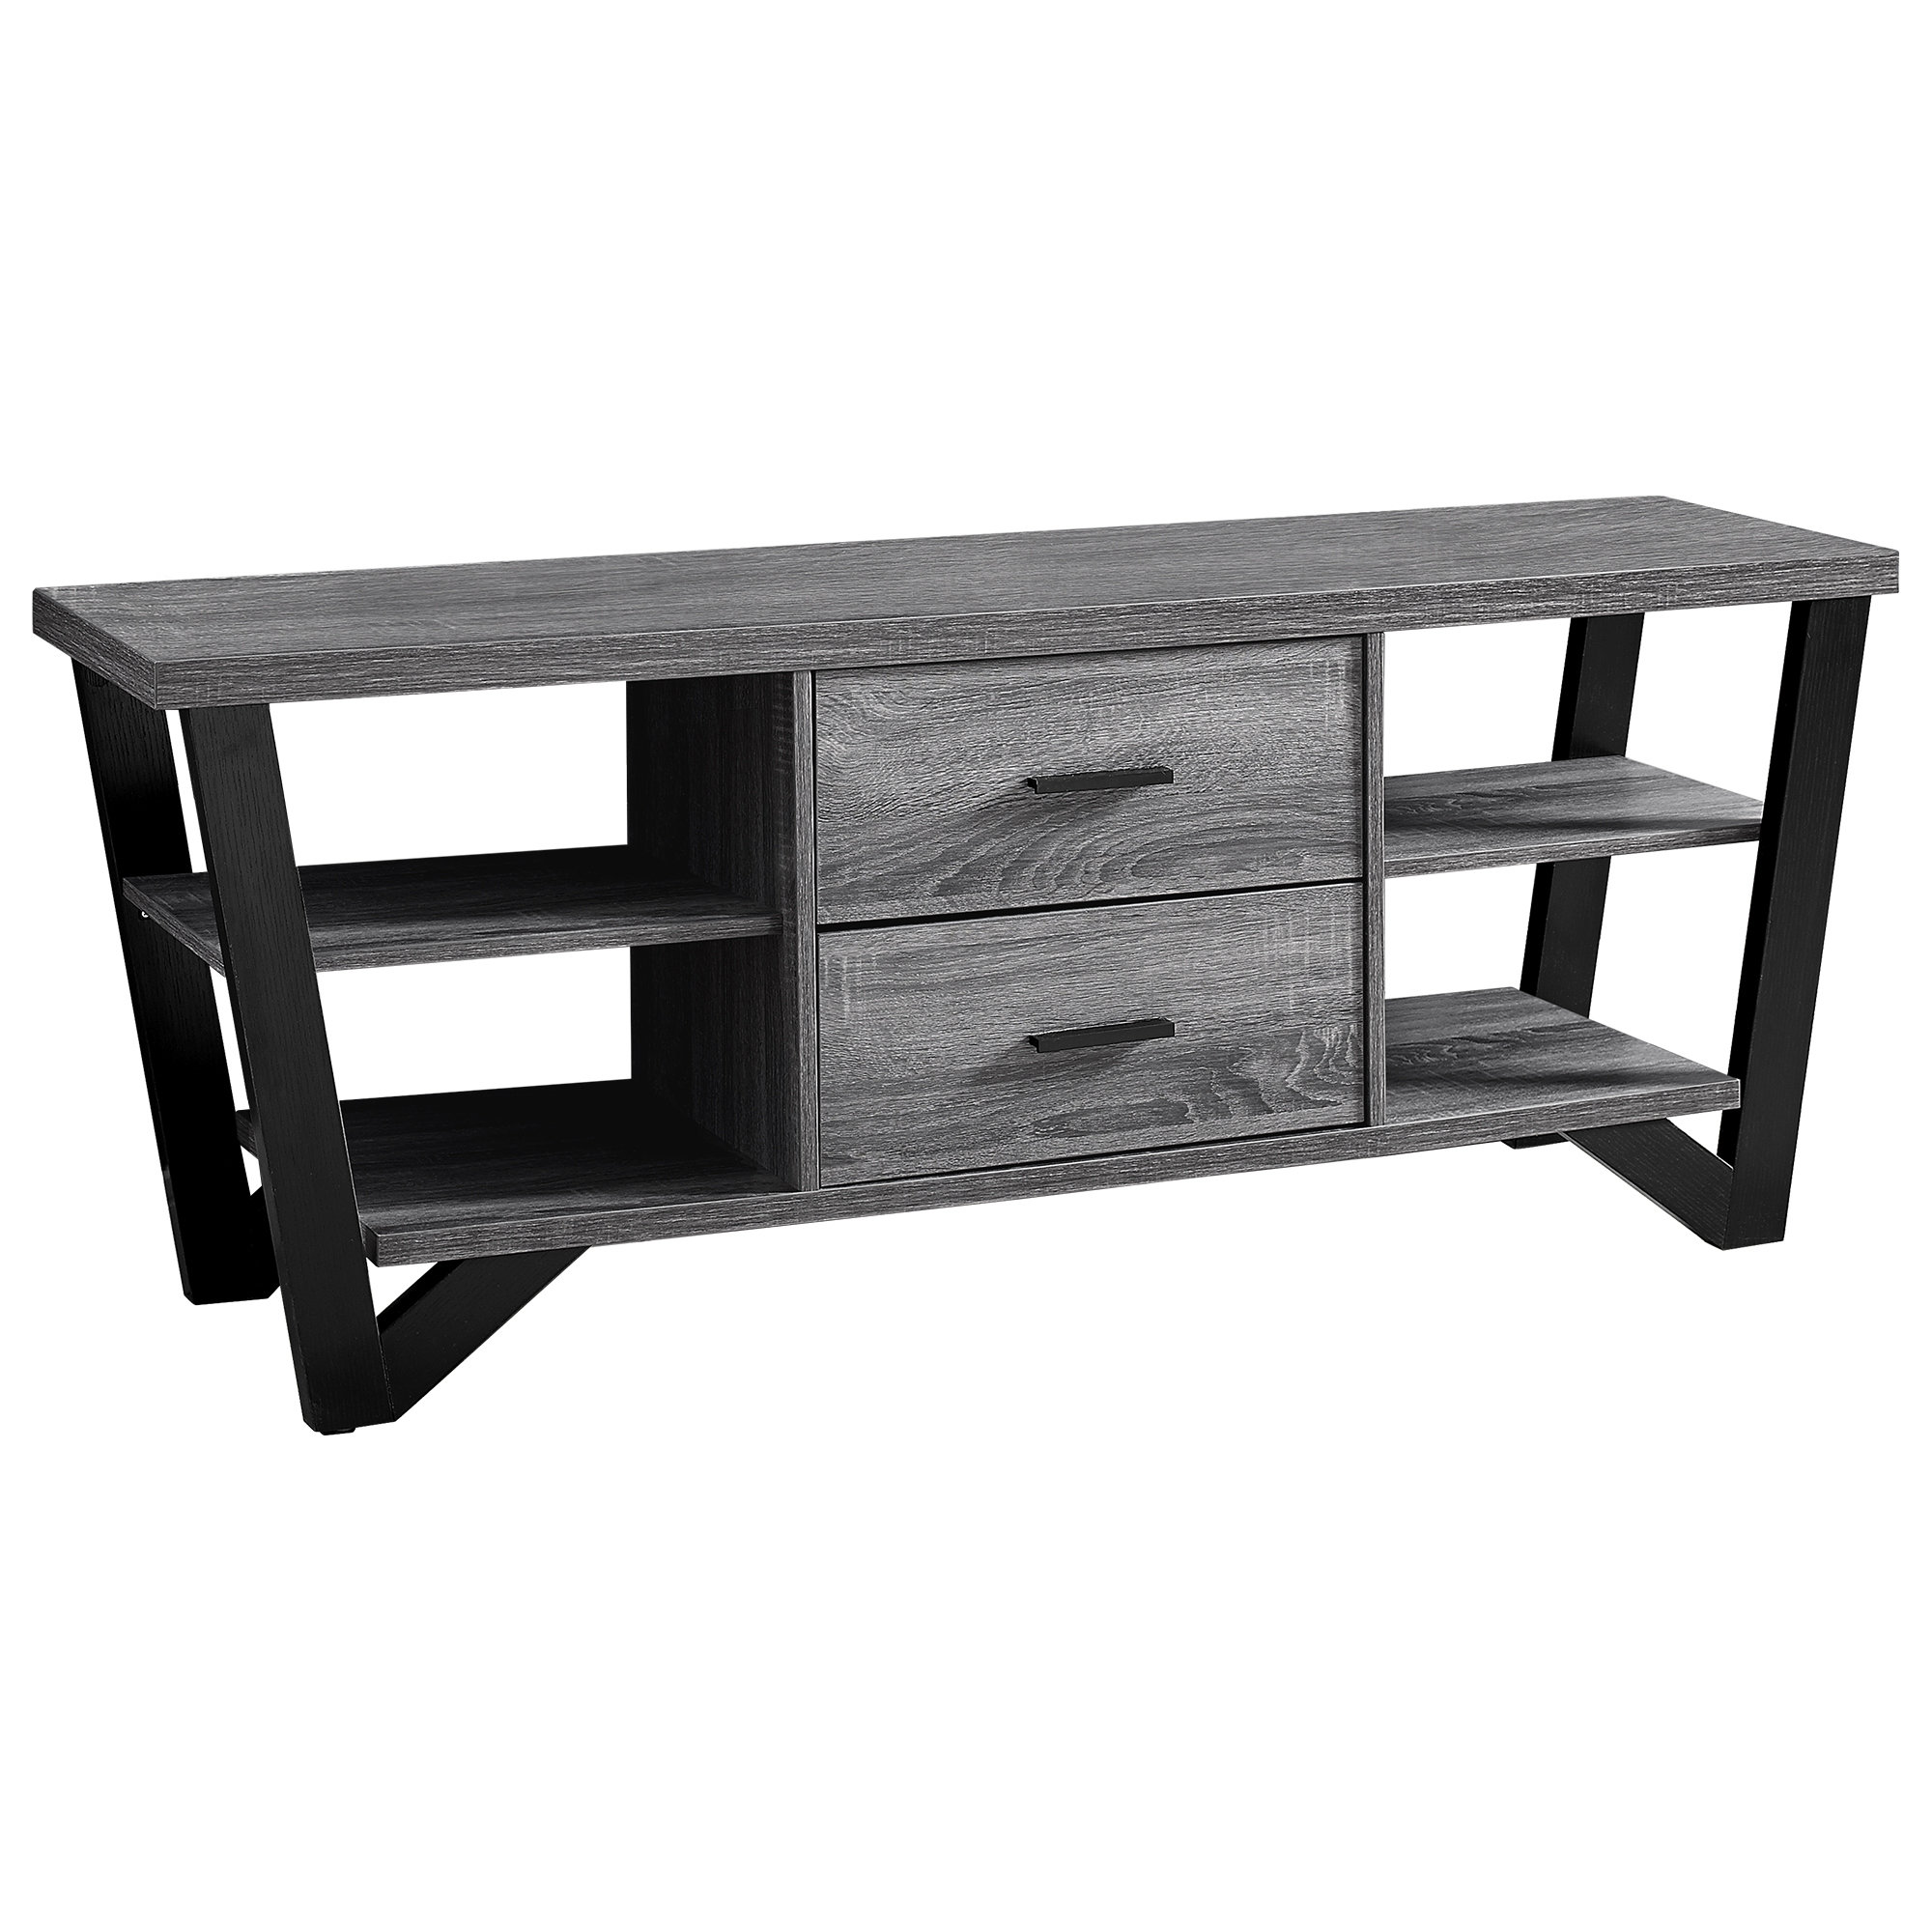 Monarch Specialties TV STAND - 60"L / GREY-BLACK WITH 2 STORAGE DRAWERS